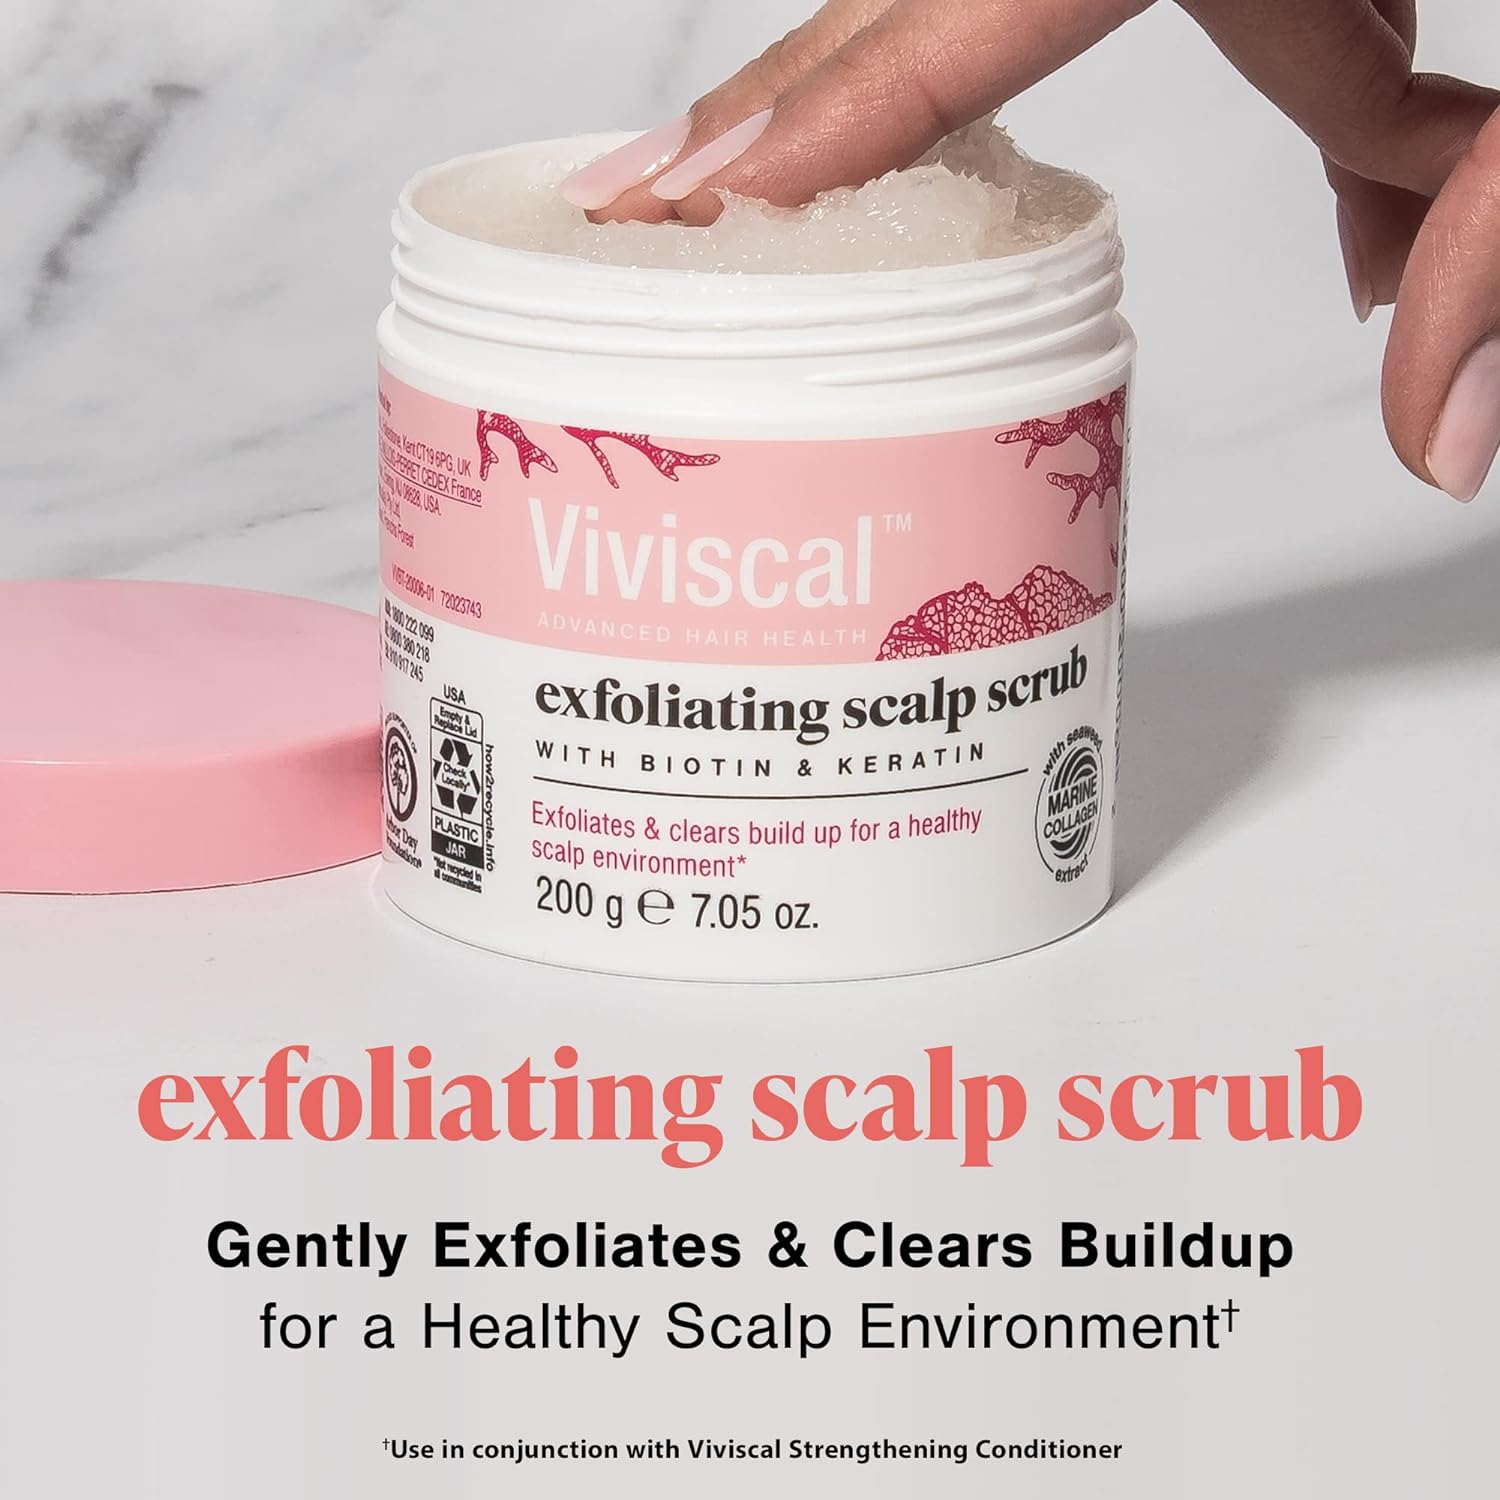 Viviscal exfoliating scalp scrub gently exfoliates and clears buildup for a healthy scalp environment